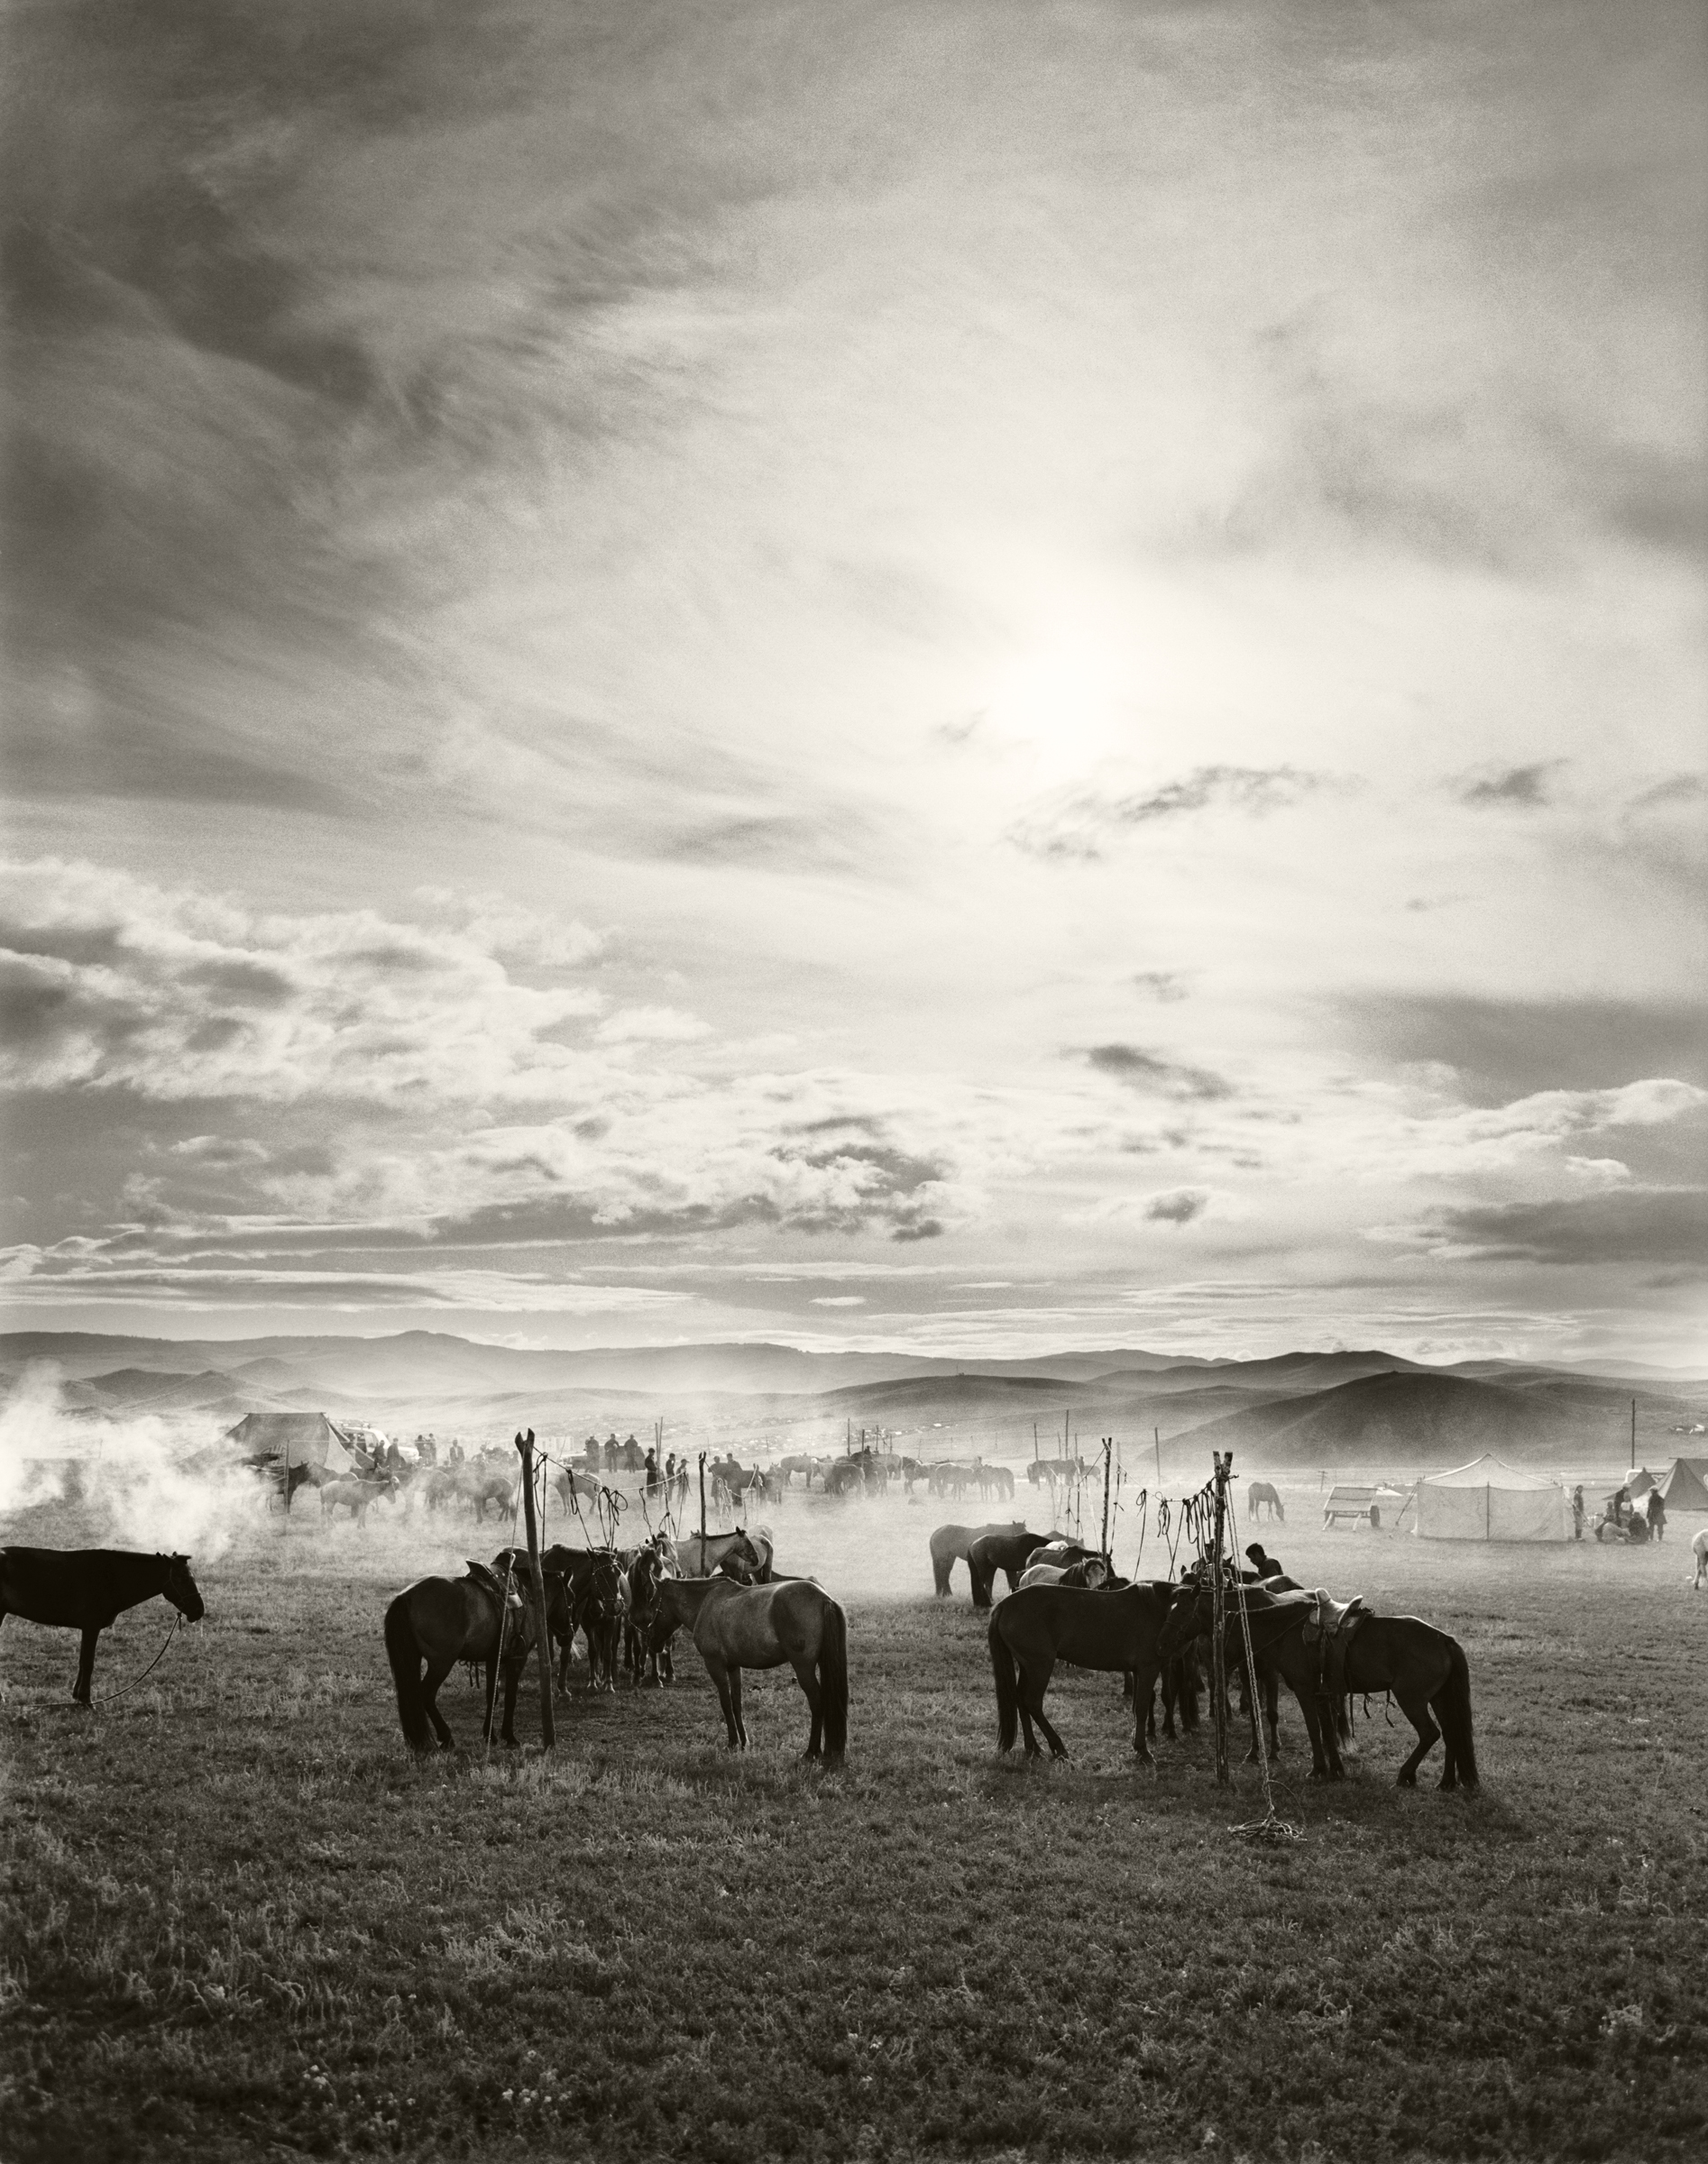 LANDSCAPE IN MONGOLIA WITH HORSES